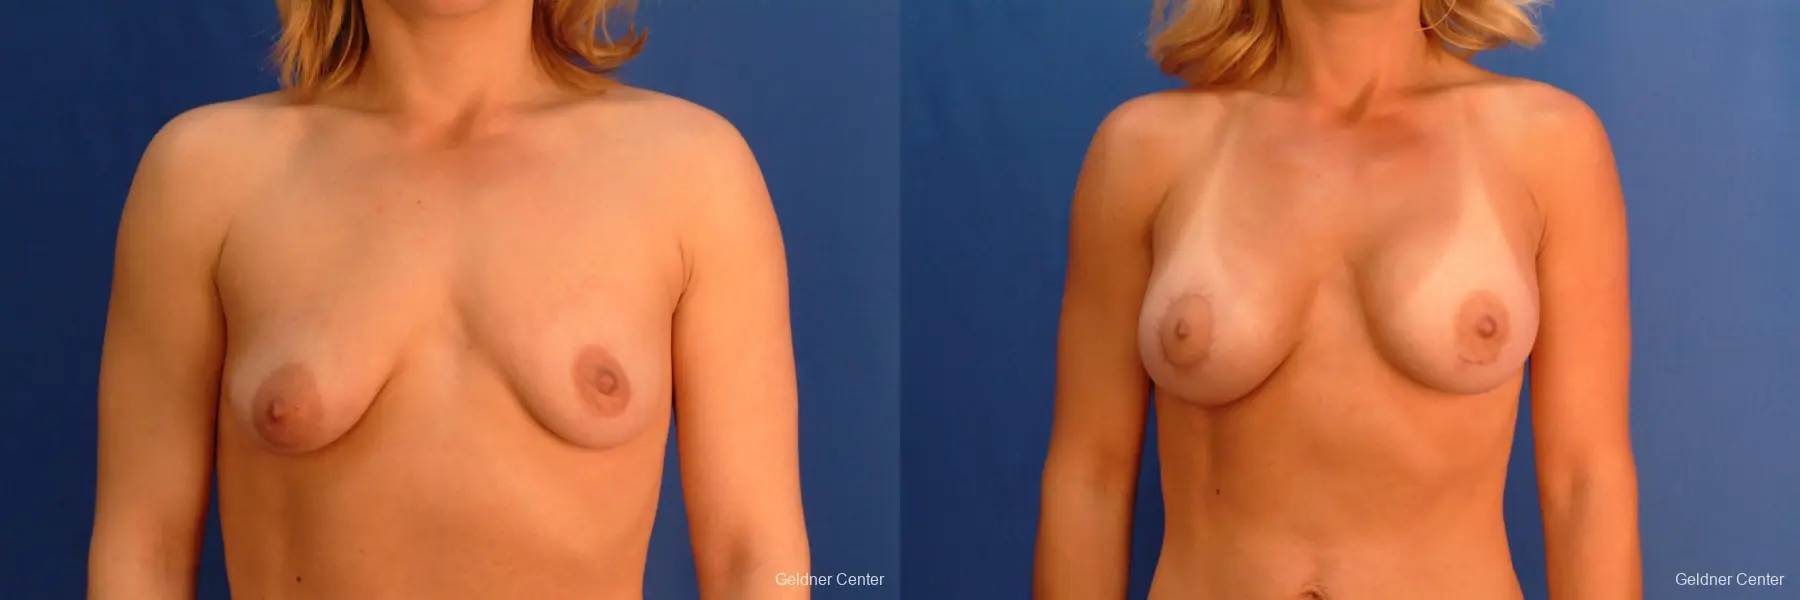 Breast Augmentation Lake Shore Dr, Chicago 2637 - Before and After 1